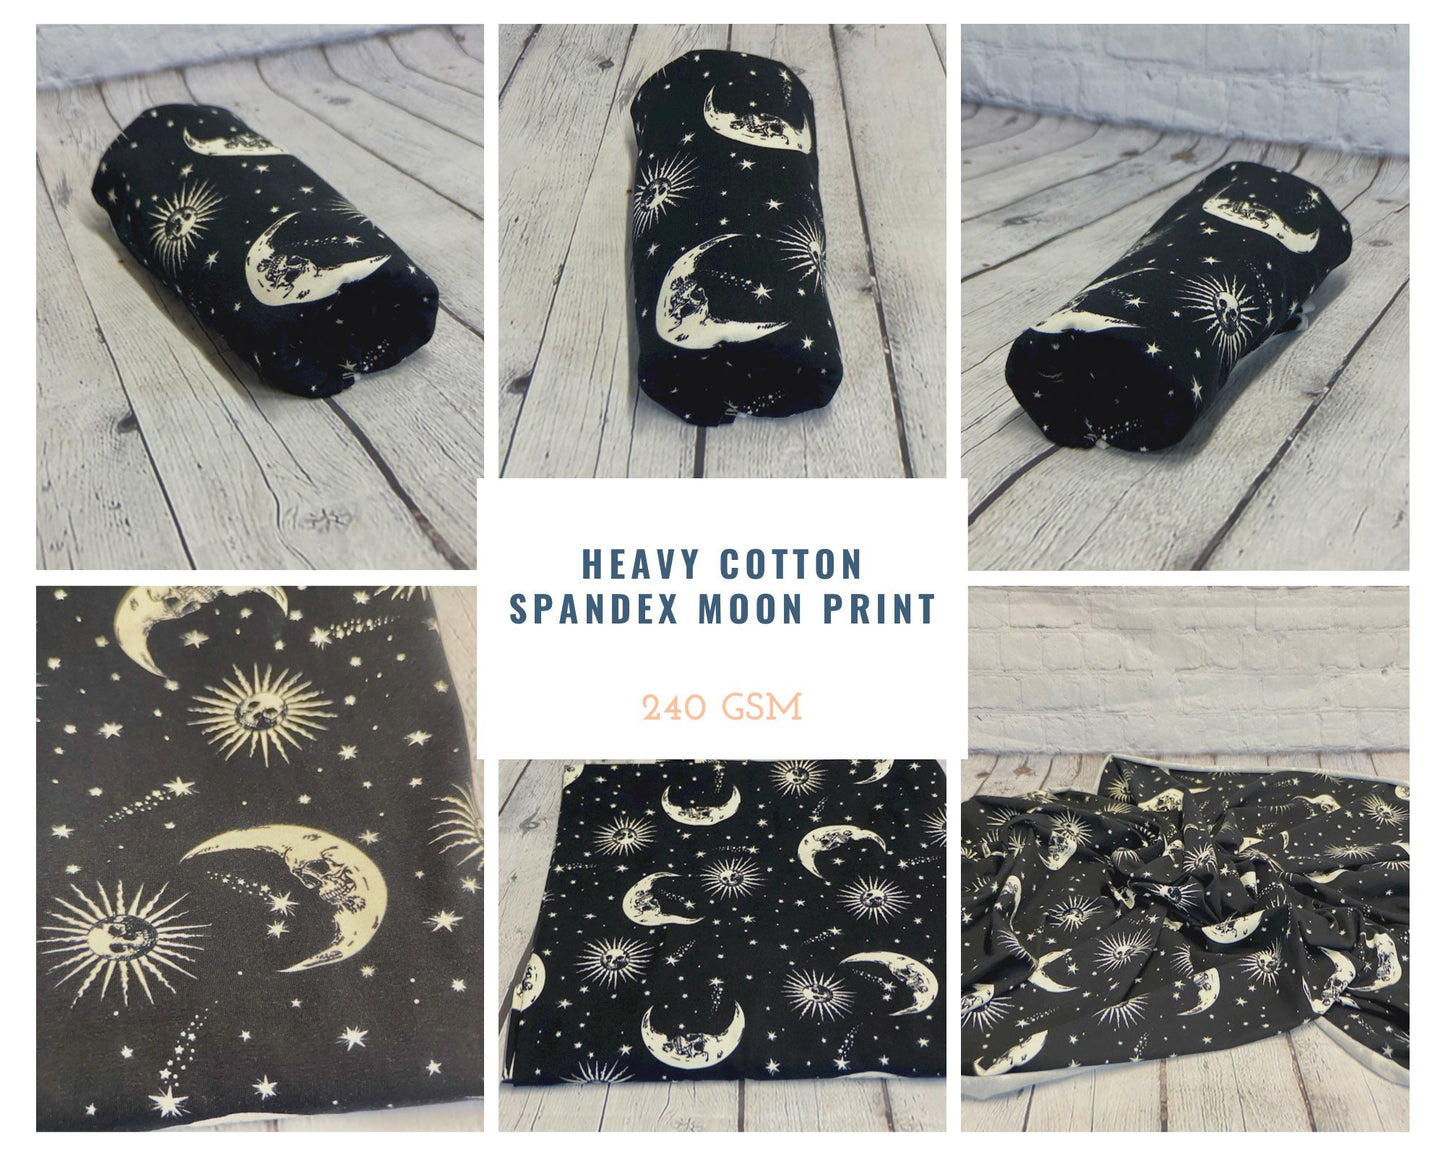 Heavy Weight Cotton Spandex Gothic Skull Crescent Moon Print Fabric By The Yard 240 GSM